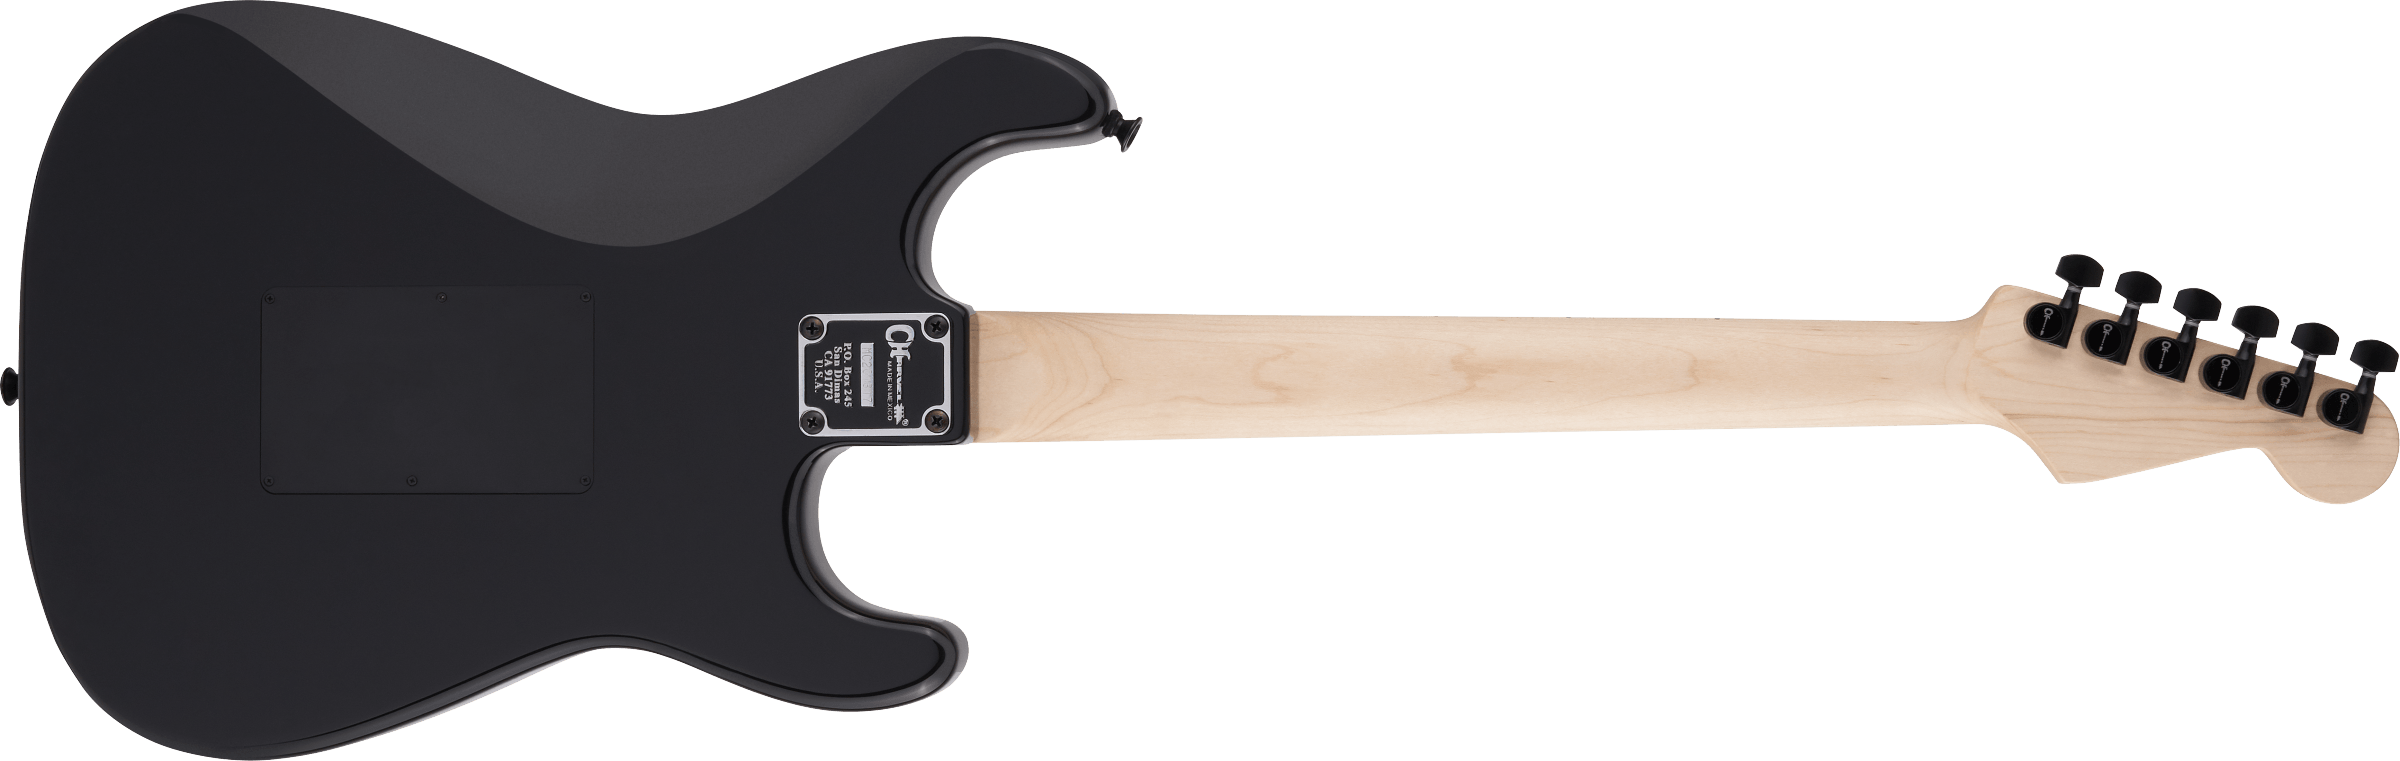 CHARVEL LEFT HANDED  Pro-Mod So-Cal Style 1 HH FR M LH, Maple Fingerboard, Gloss Black 2968001506